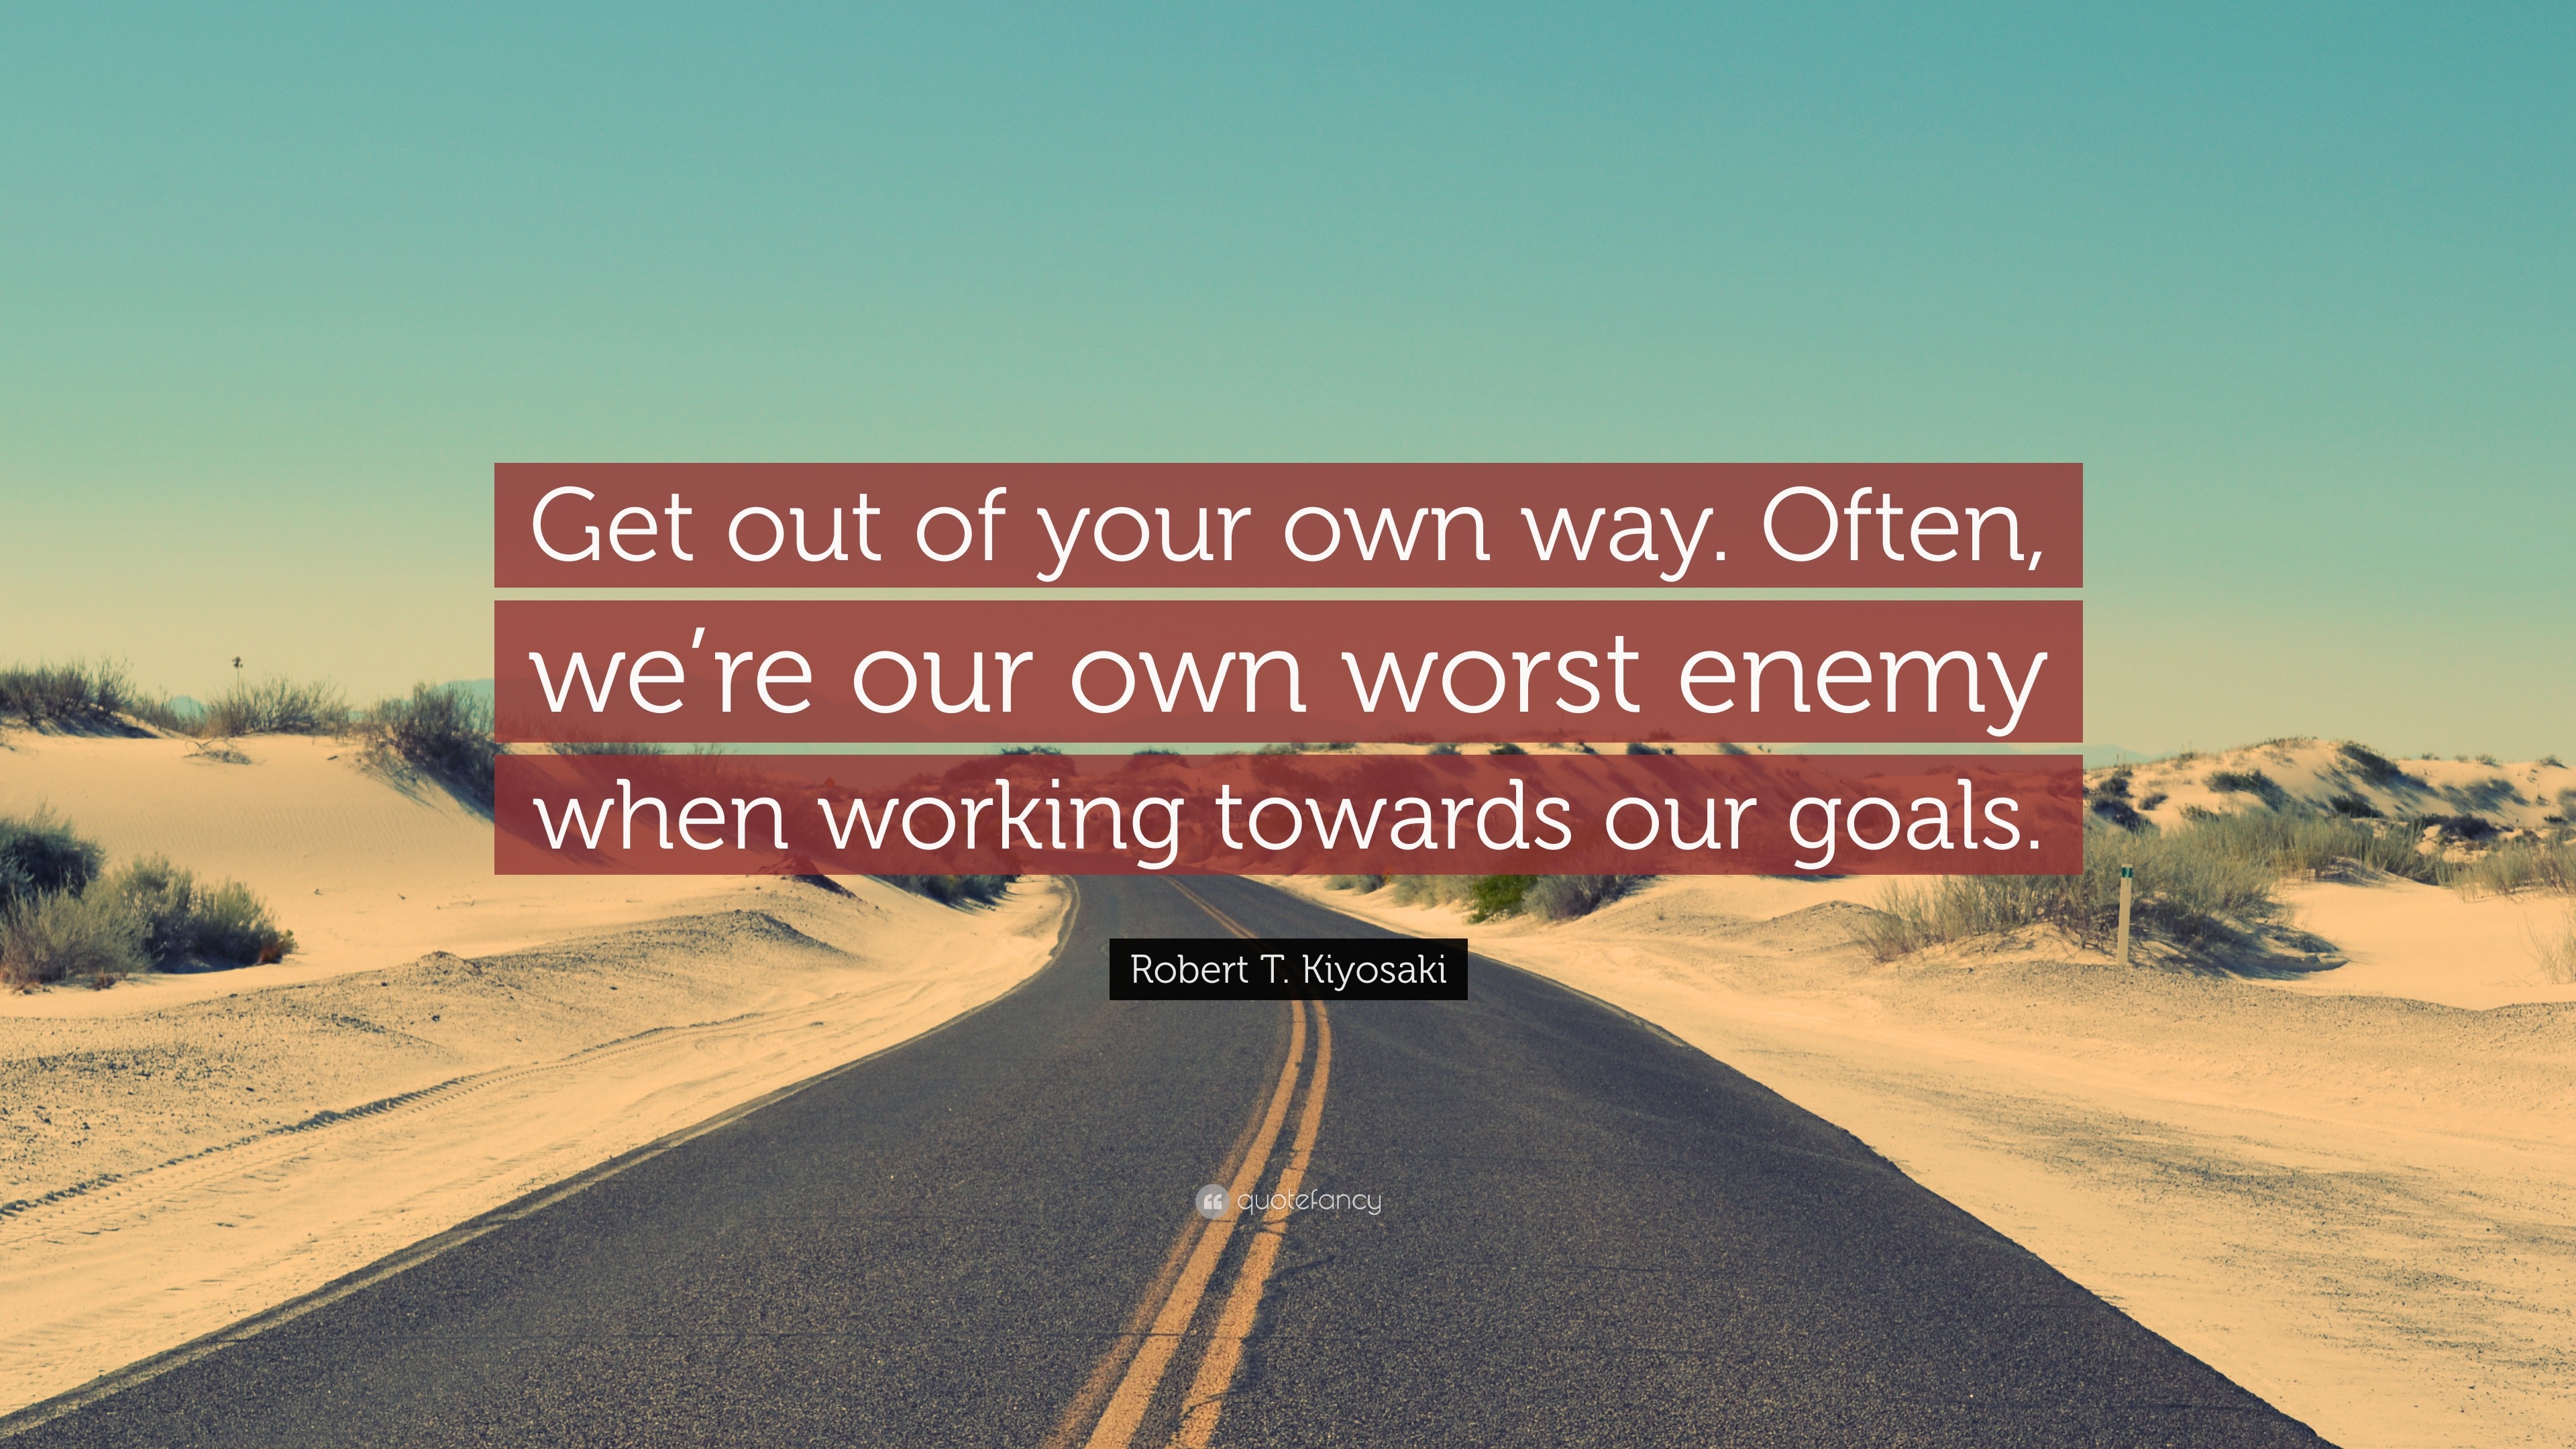 Robert T Kiyosaki Quote Get Out Of Your Own Way Often We Re Our Own Worst